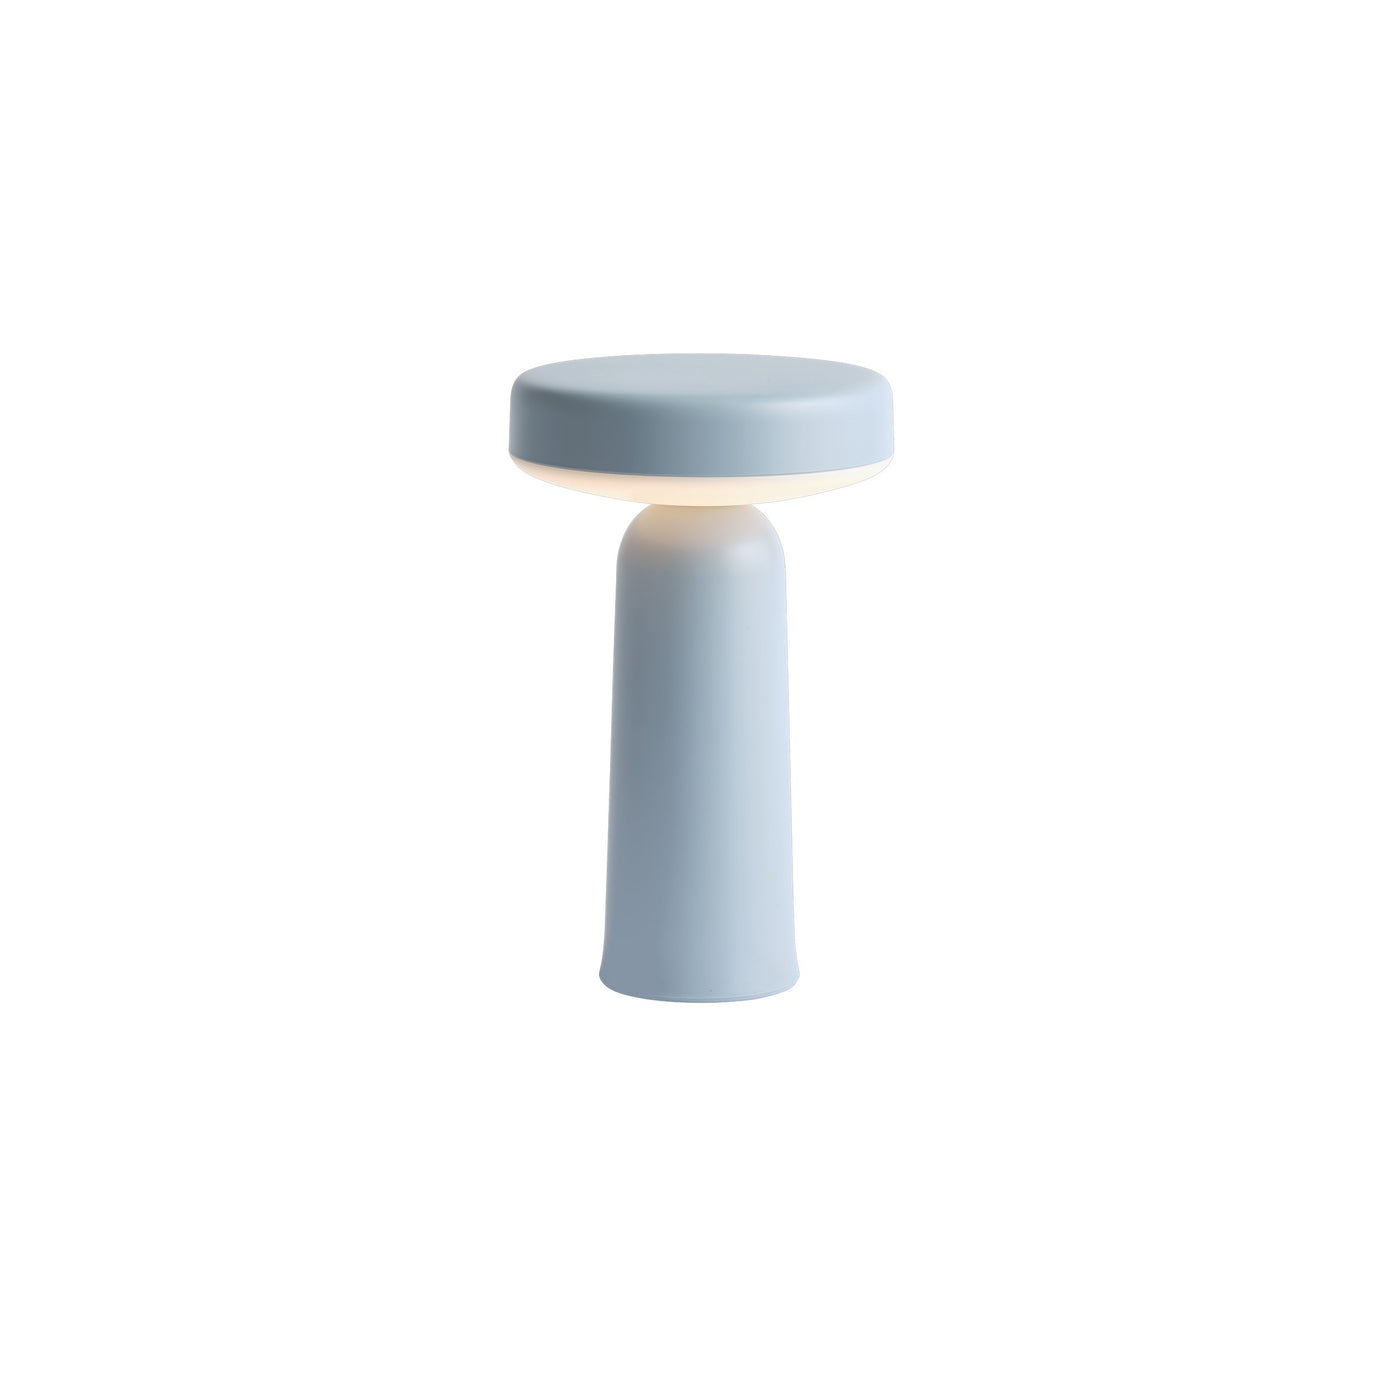 Muuto Ease Portable Lamp. Free UK delivery at someday designs. #colour_light-blue